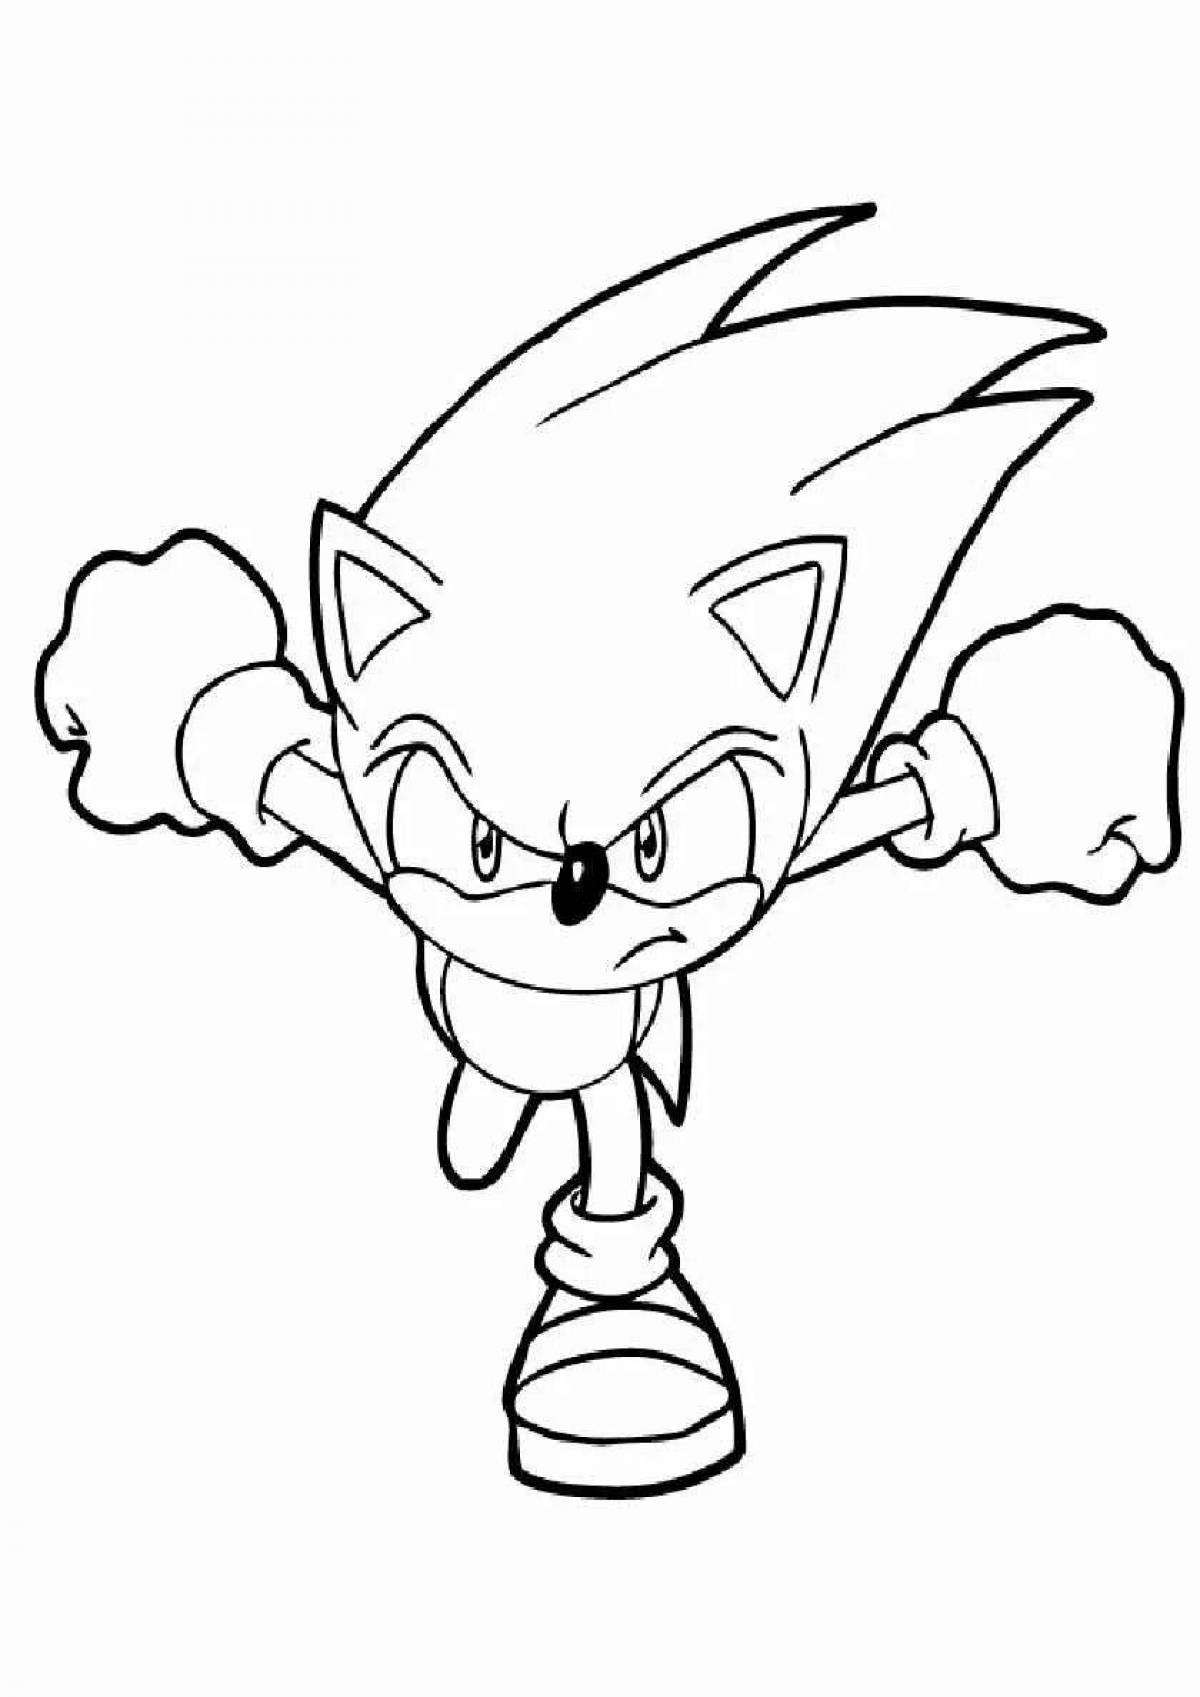 Immaculate darkspine sonic coloring page